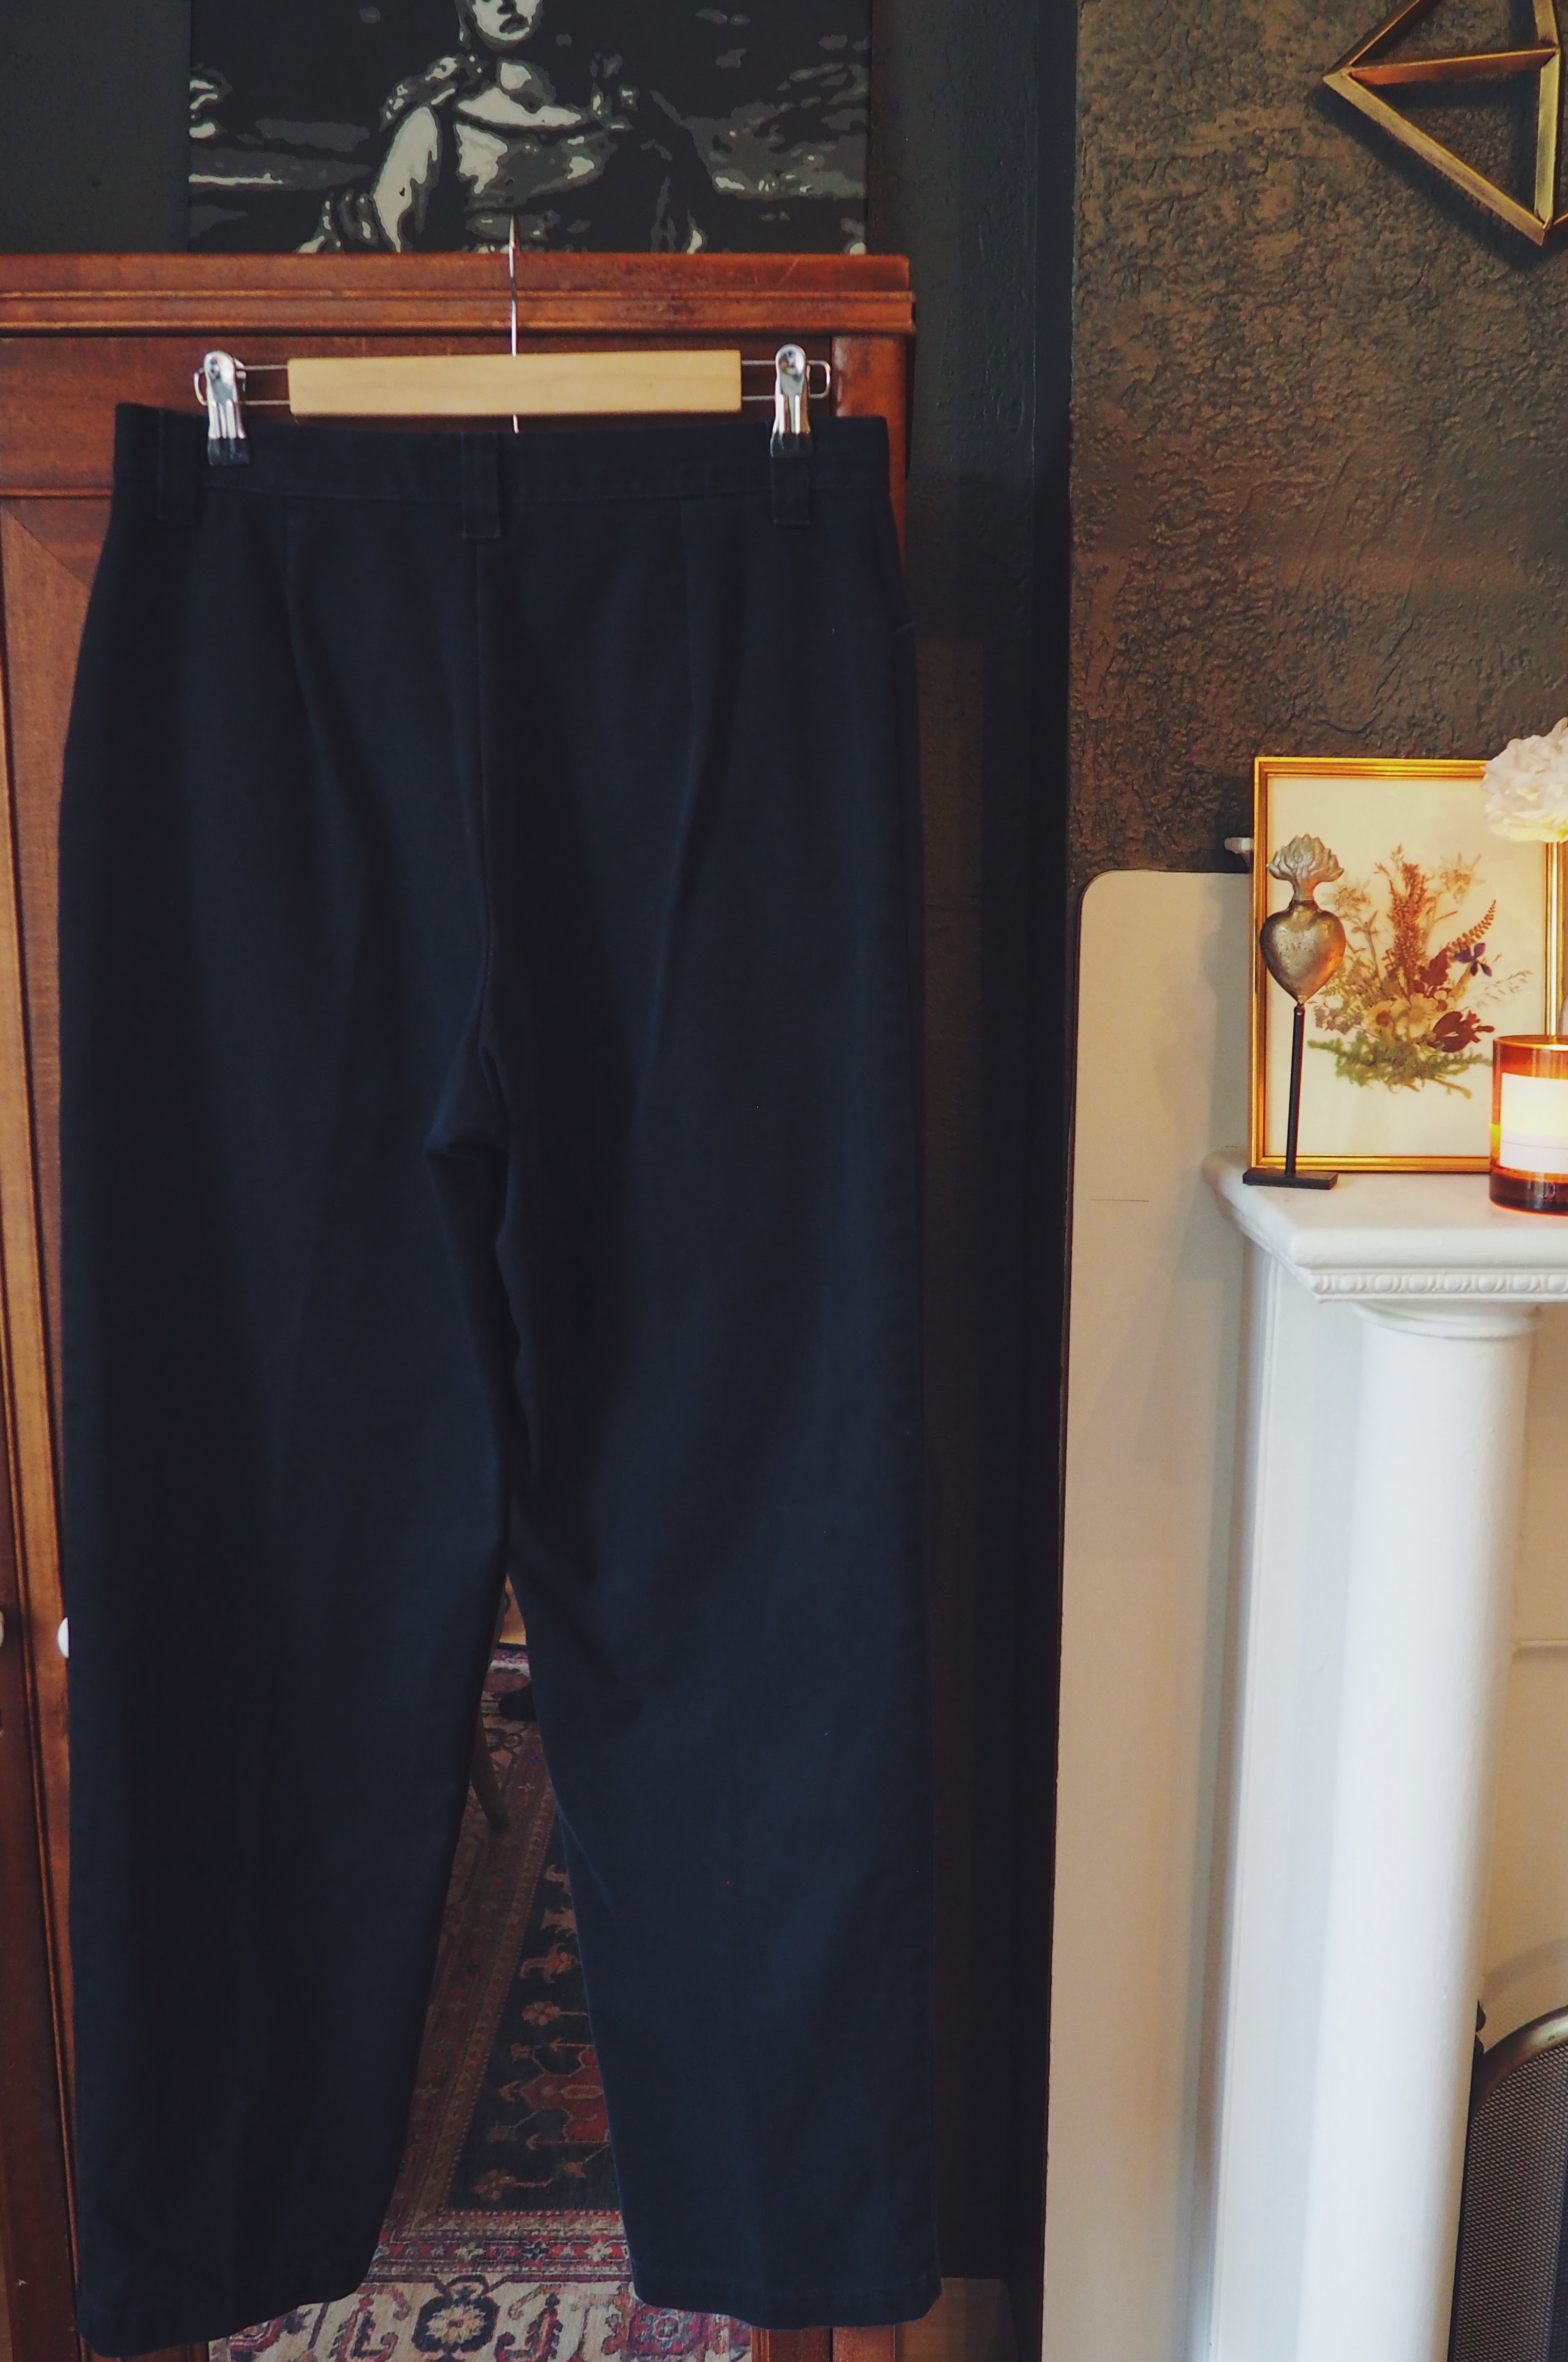 Vintage 100% Cotton High-Waisted Navy Pants